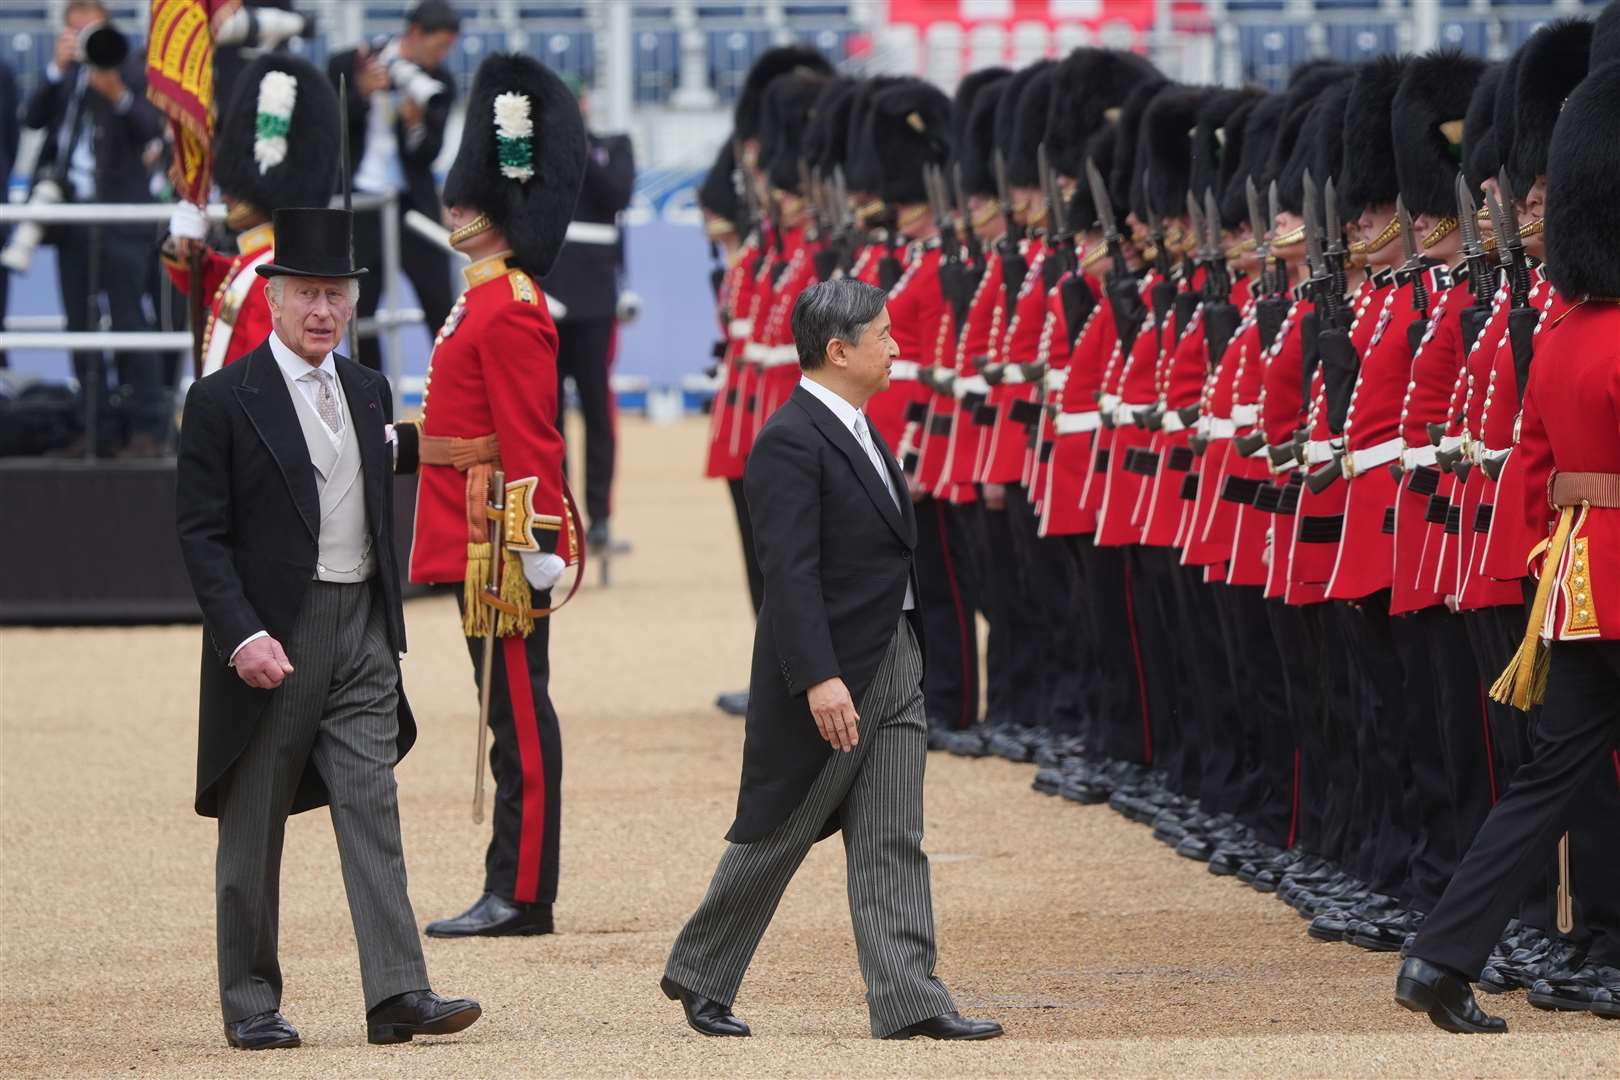 The King follows behind as Emperor Naruhito inspects the guard (Jeff Moore/PA)